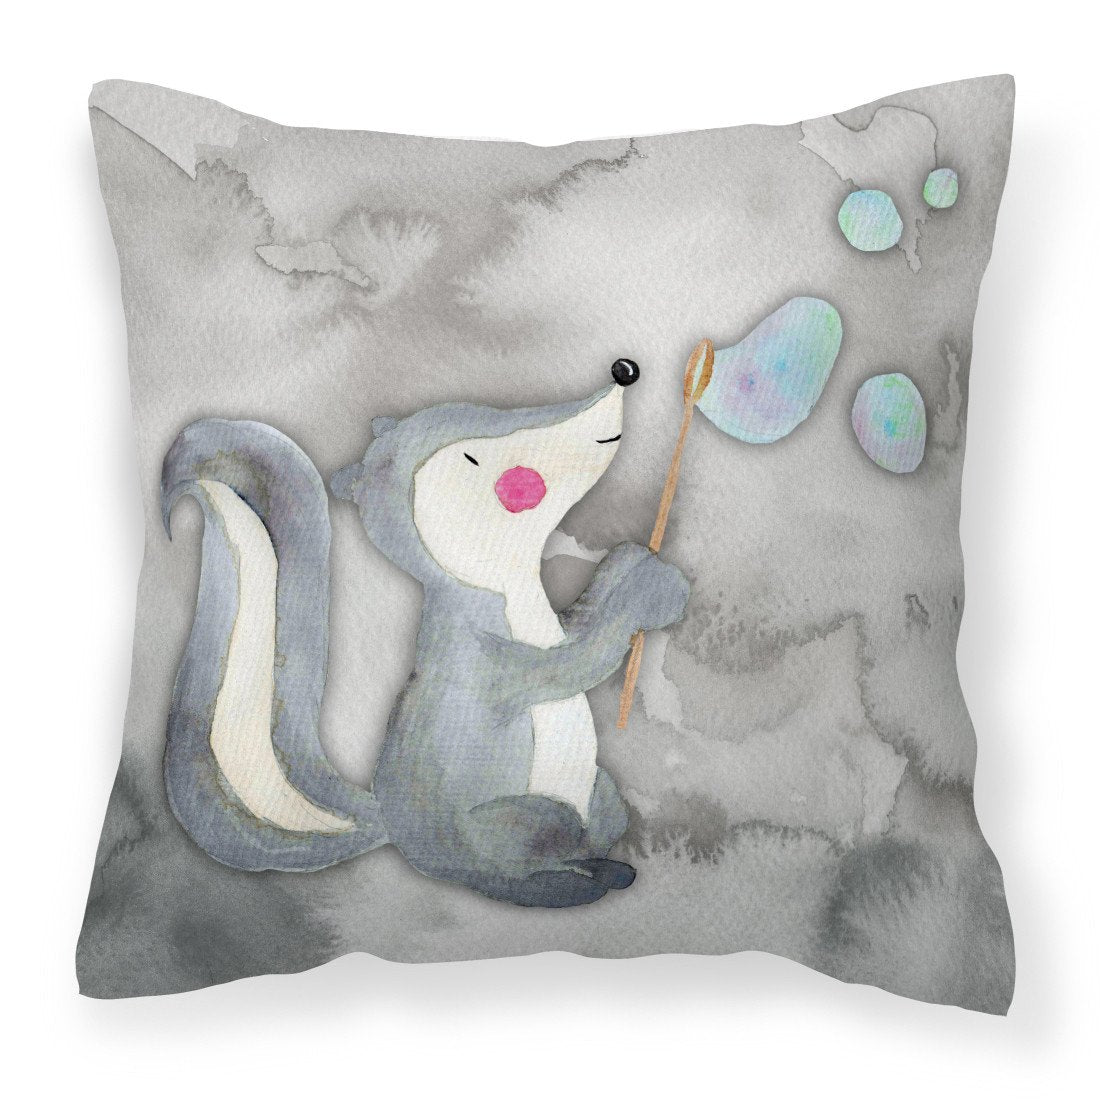 Skunk and Bubbles Watercolor Fabric Decorative Pillow BB7352PW1818 by Caroline's Treasures